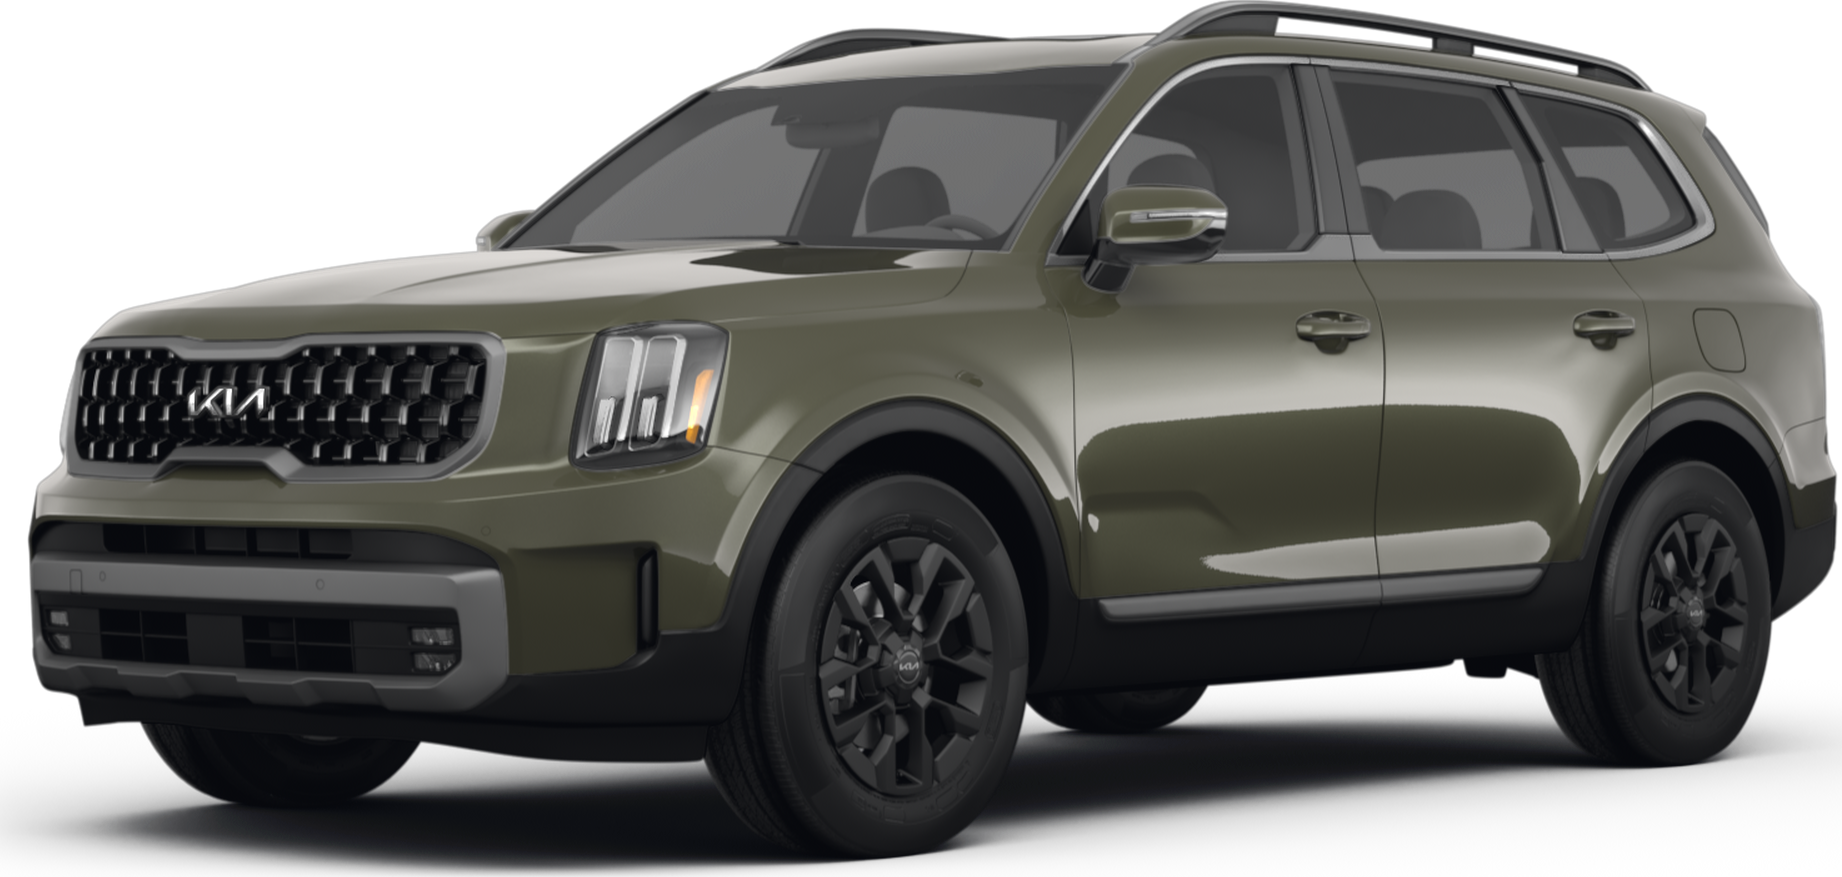 https://file.kelleybluebookimages.com/kbb/base/evox/CP/52456/2024-Kia-Telluride-front_52456_032_1842x877_GMS_cropped.png